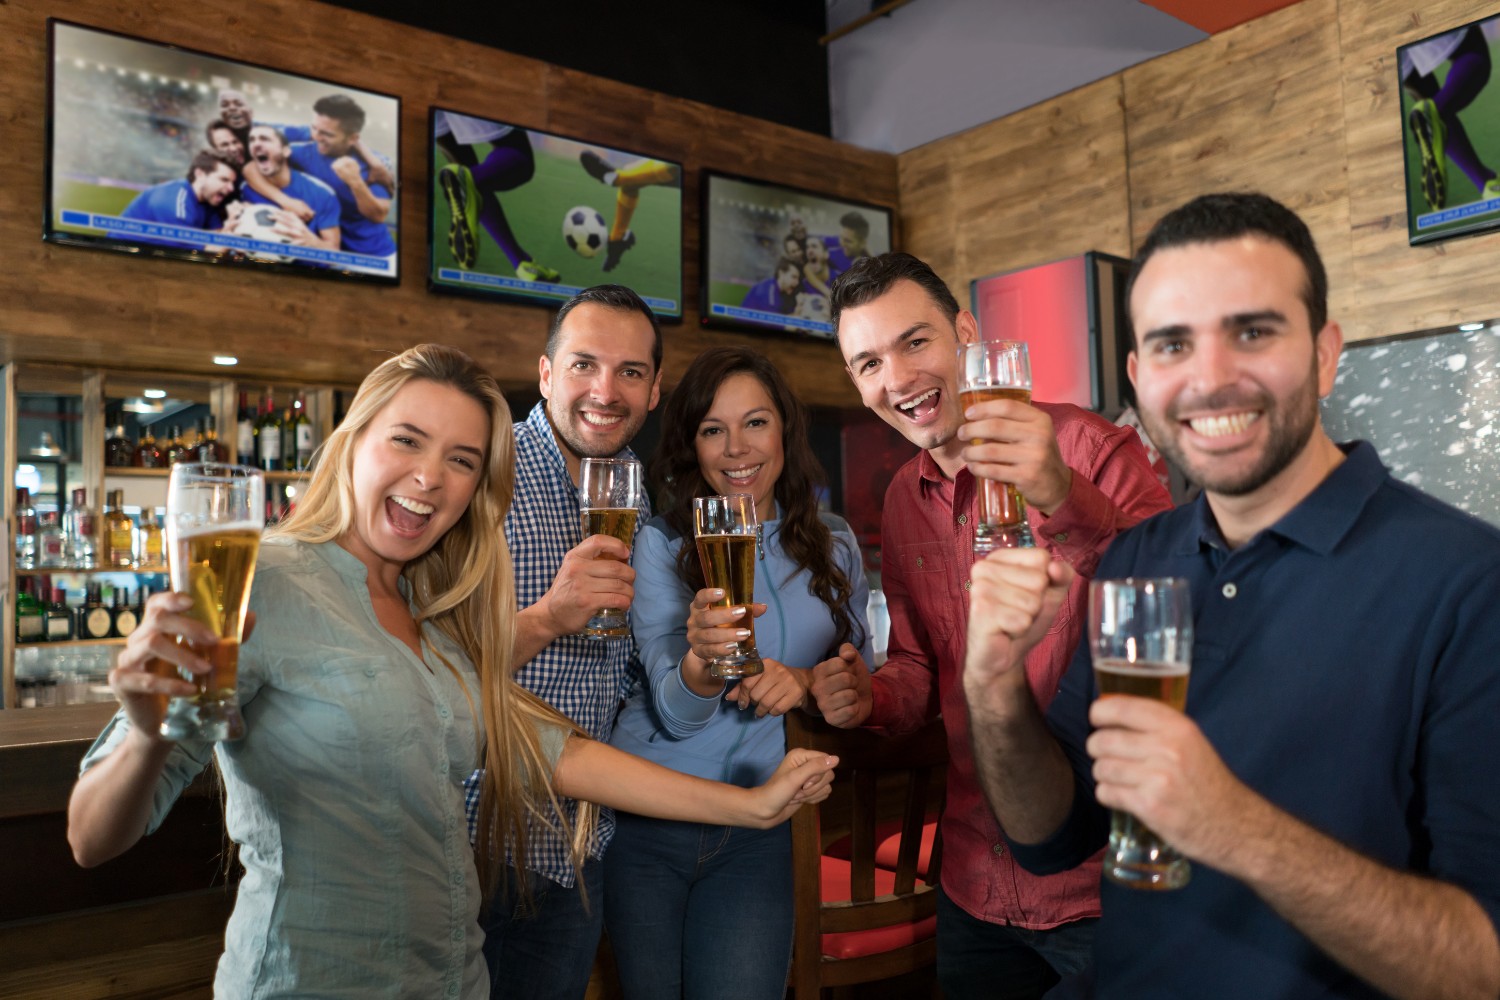 England fans boost pub sales as the football team progresses - Beer Today